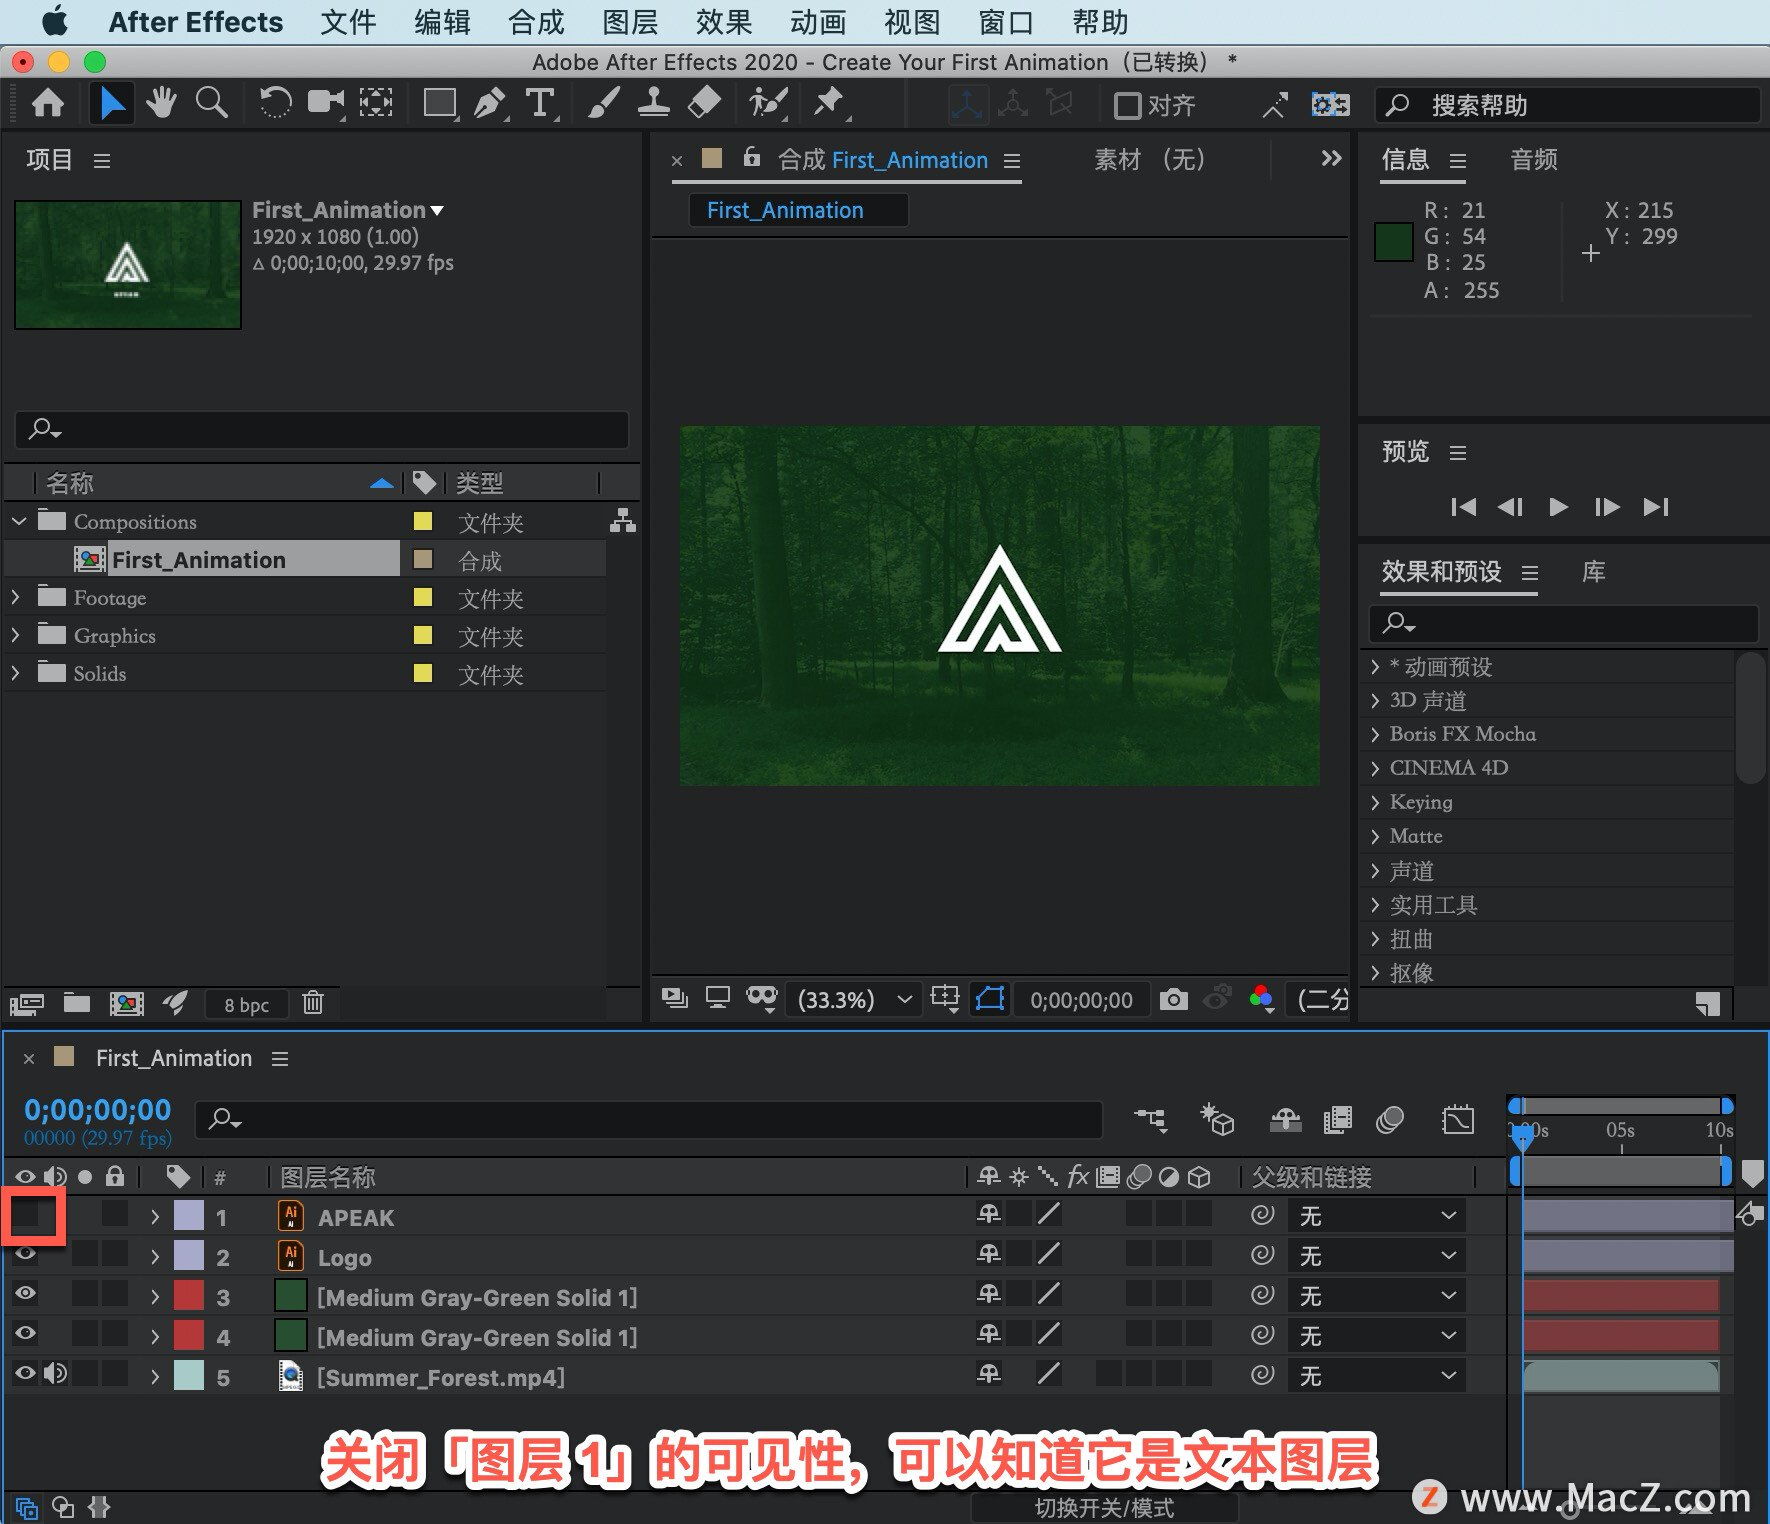 After Effects 教程「8」，如何在 After Effects 中设置关键帧？